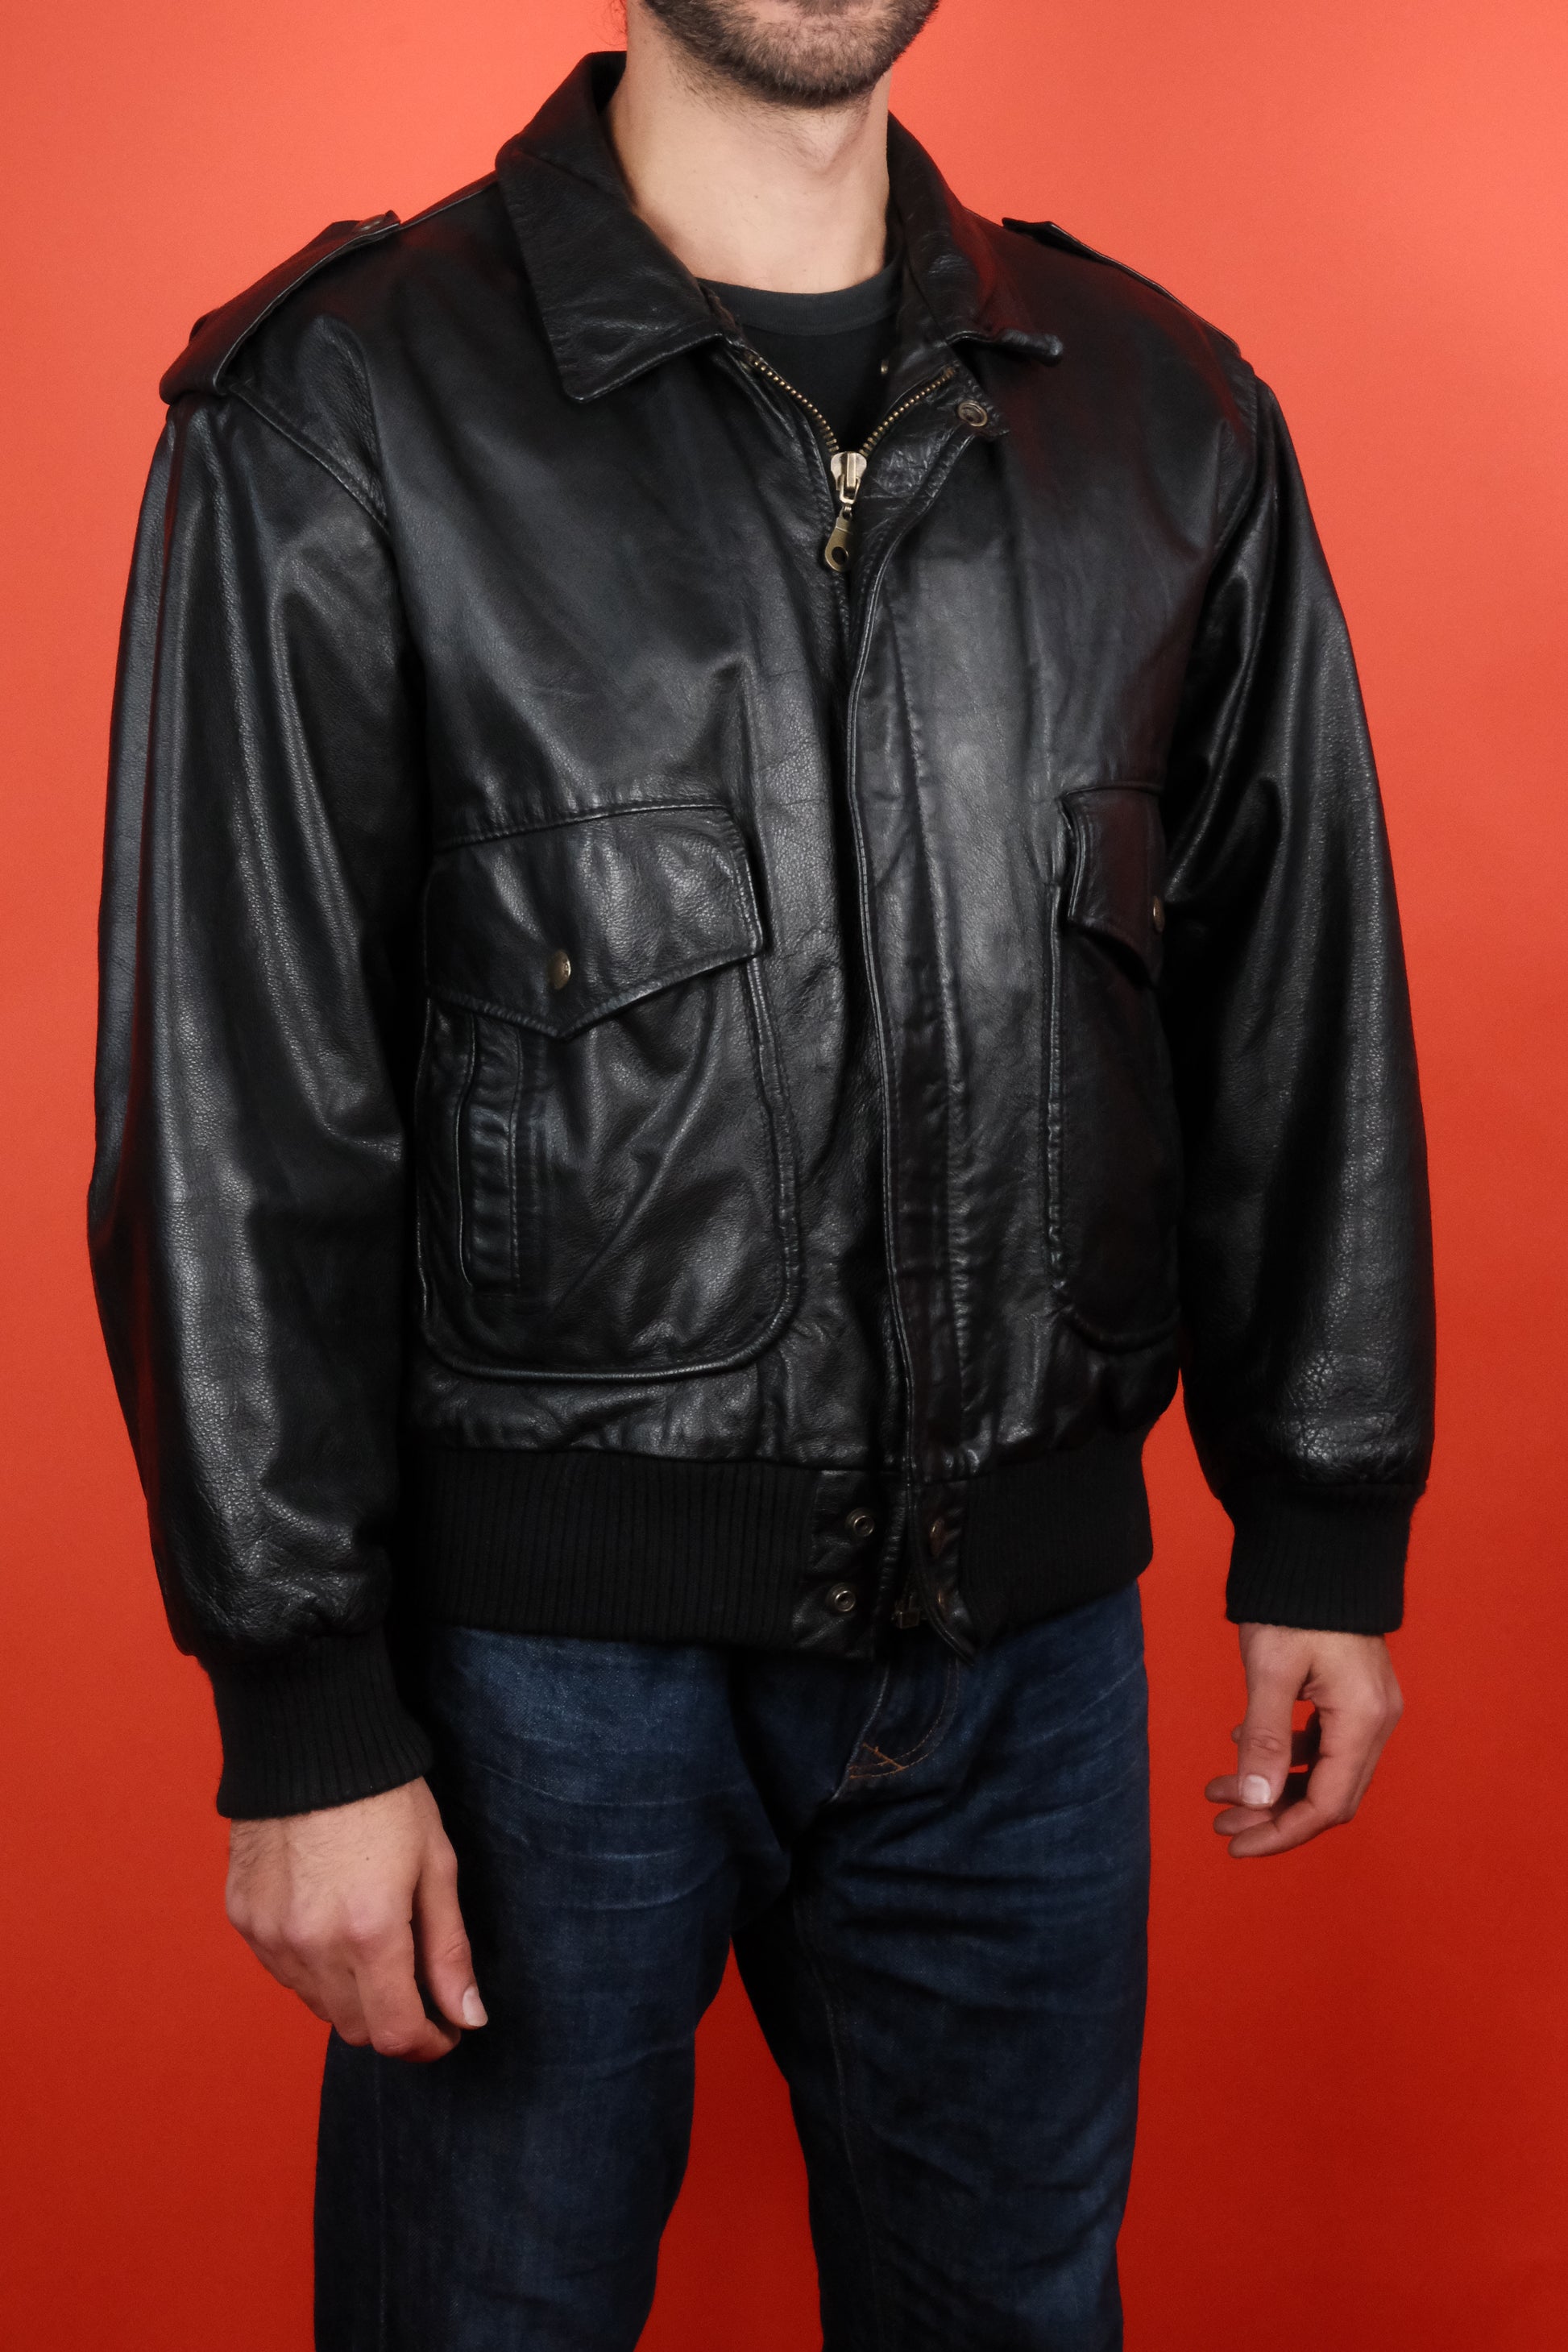 Leather Jacket Made in Italy Type A-2 'L/52' - vintage clothing clochard92.com